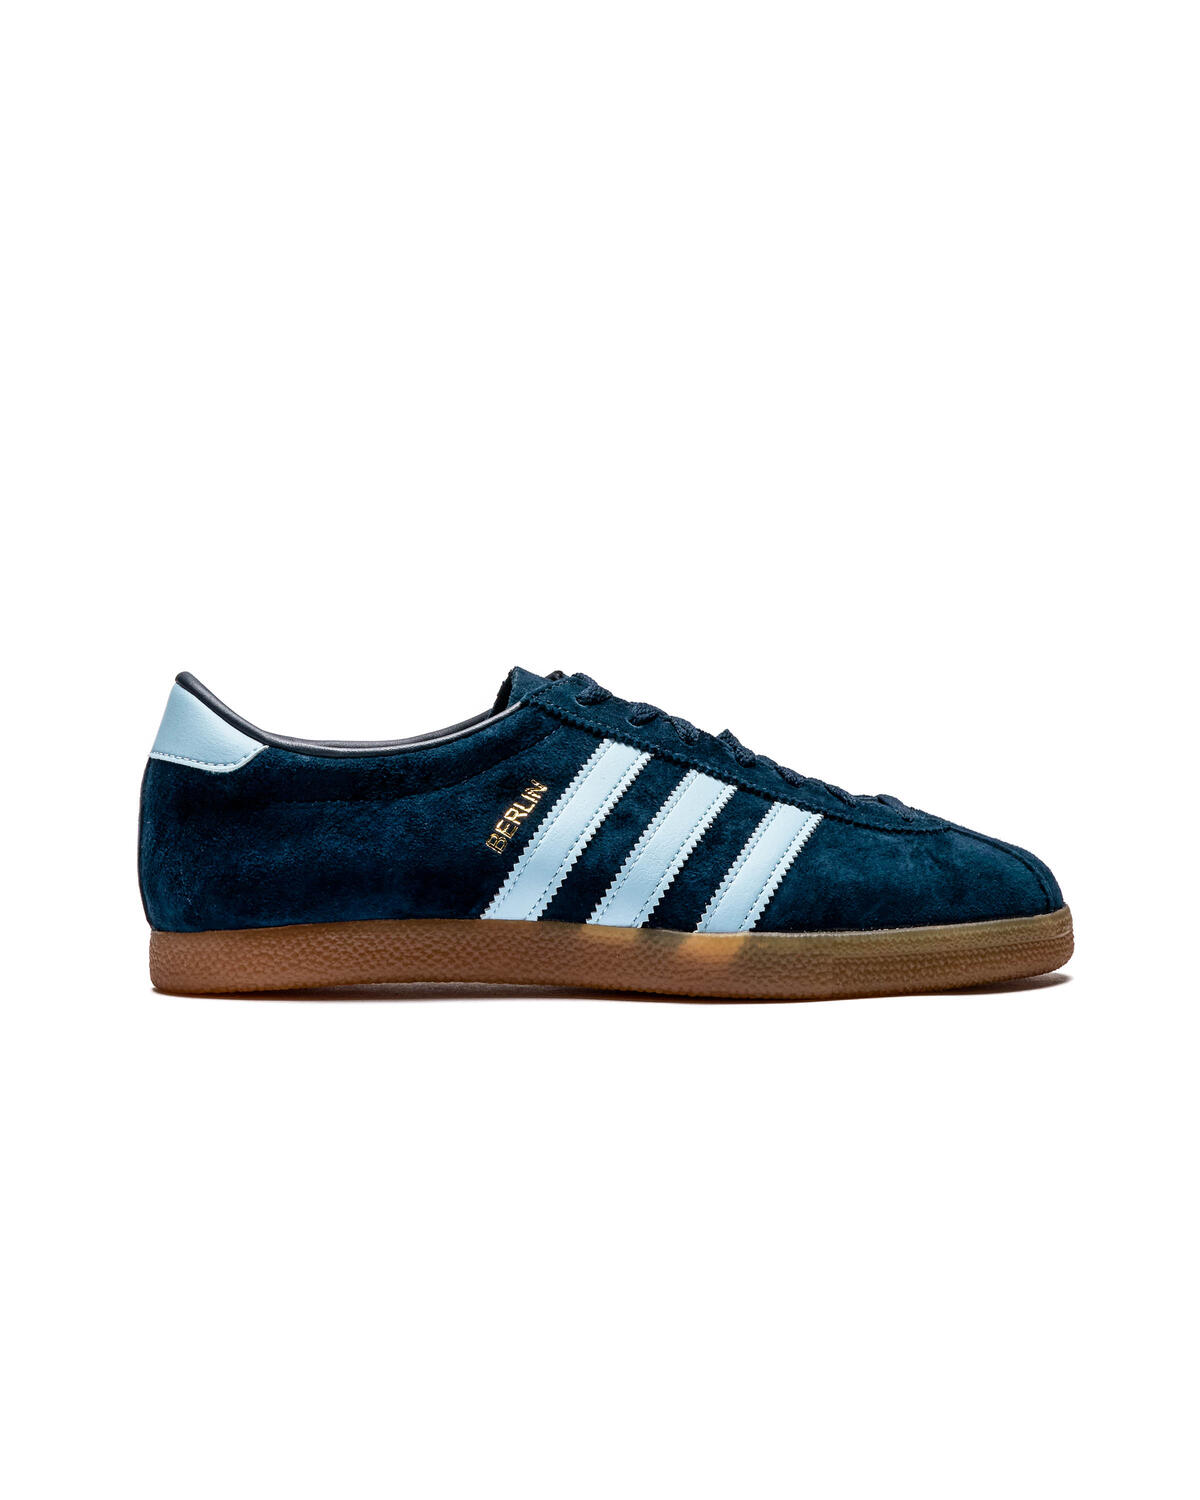 Originals BERLIN | adidas bk7404 shoes outlet locations in ohio store | GY7446 | EllisonbronzeShops STORE